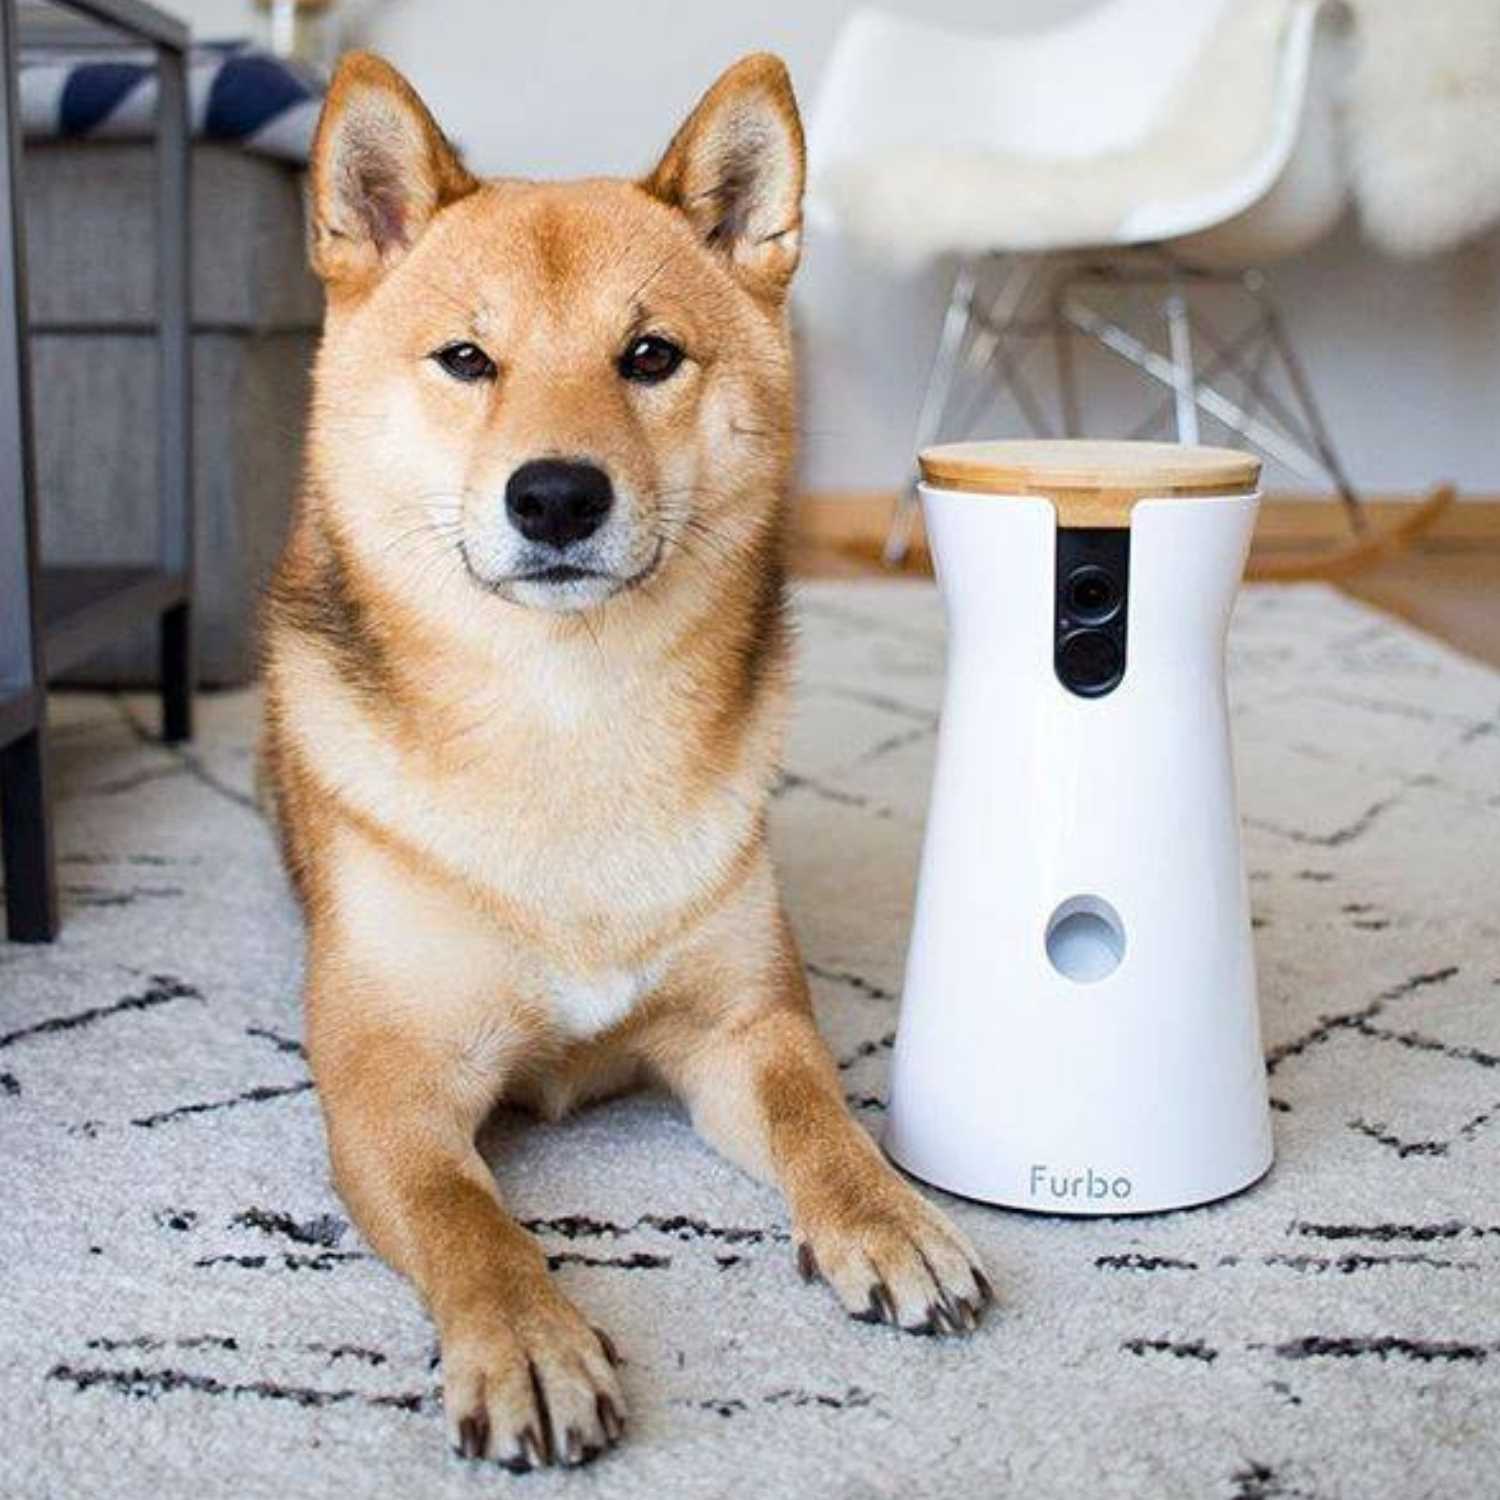 HD WiFi 2-Way Audio Interactive Dog Camera On Rug - Cool Birthday Gifts For Pet Lovers